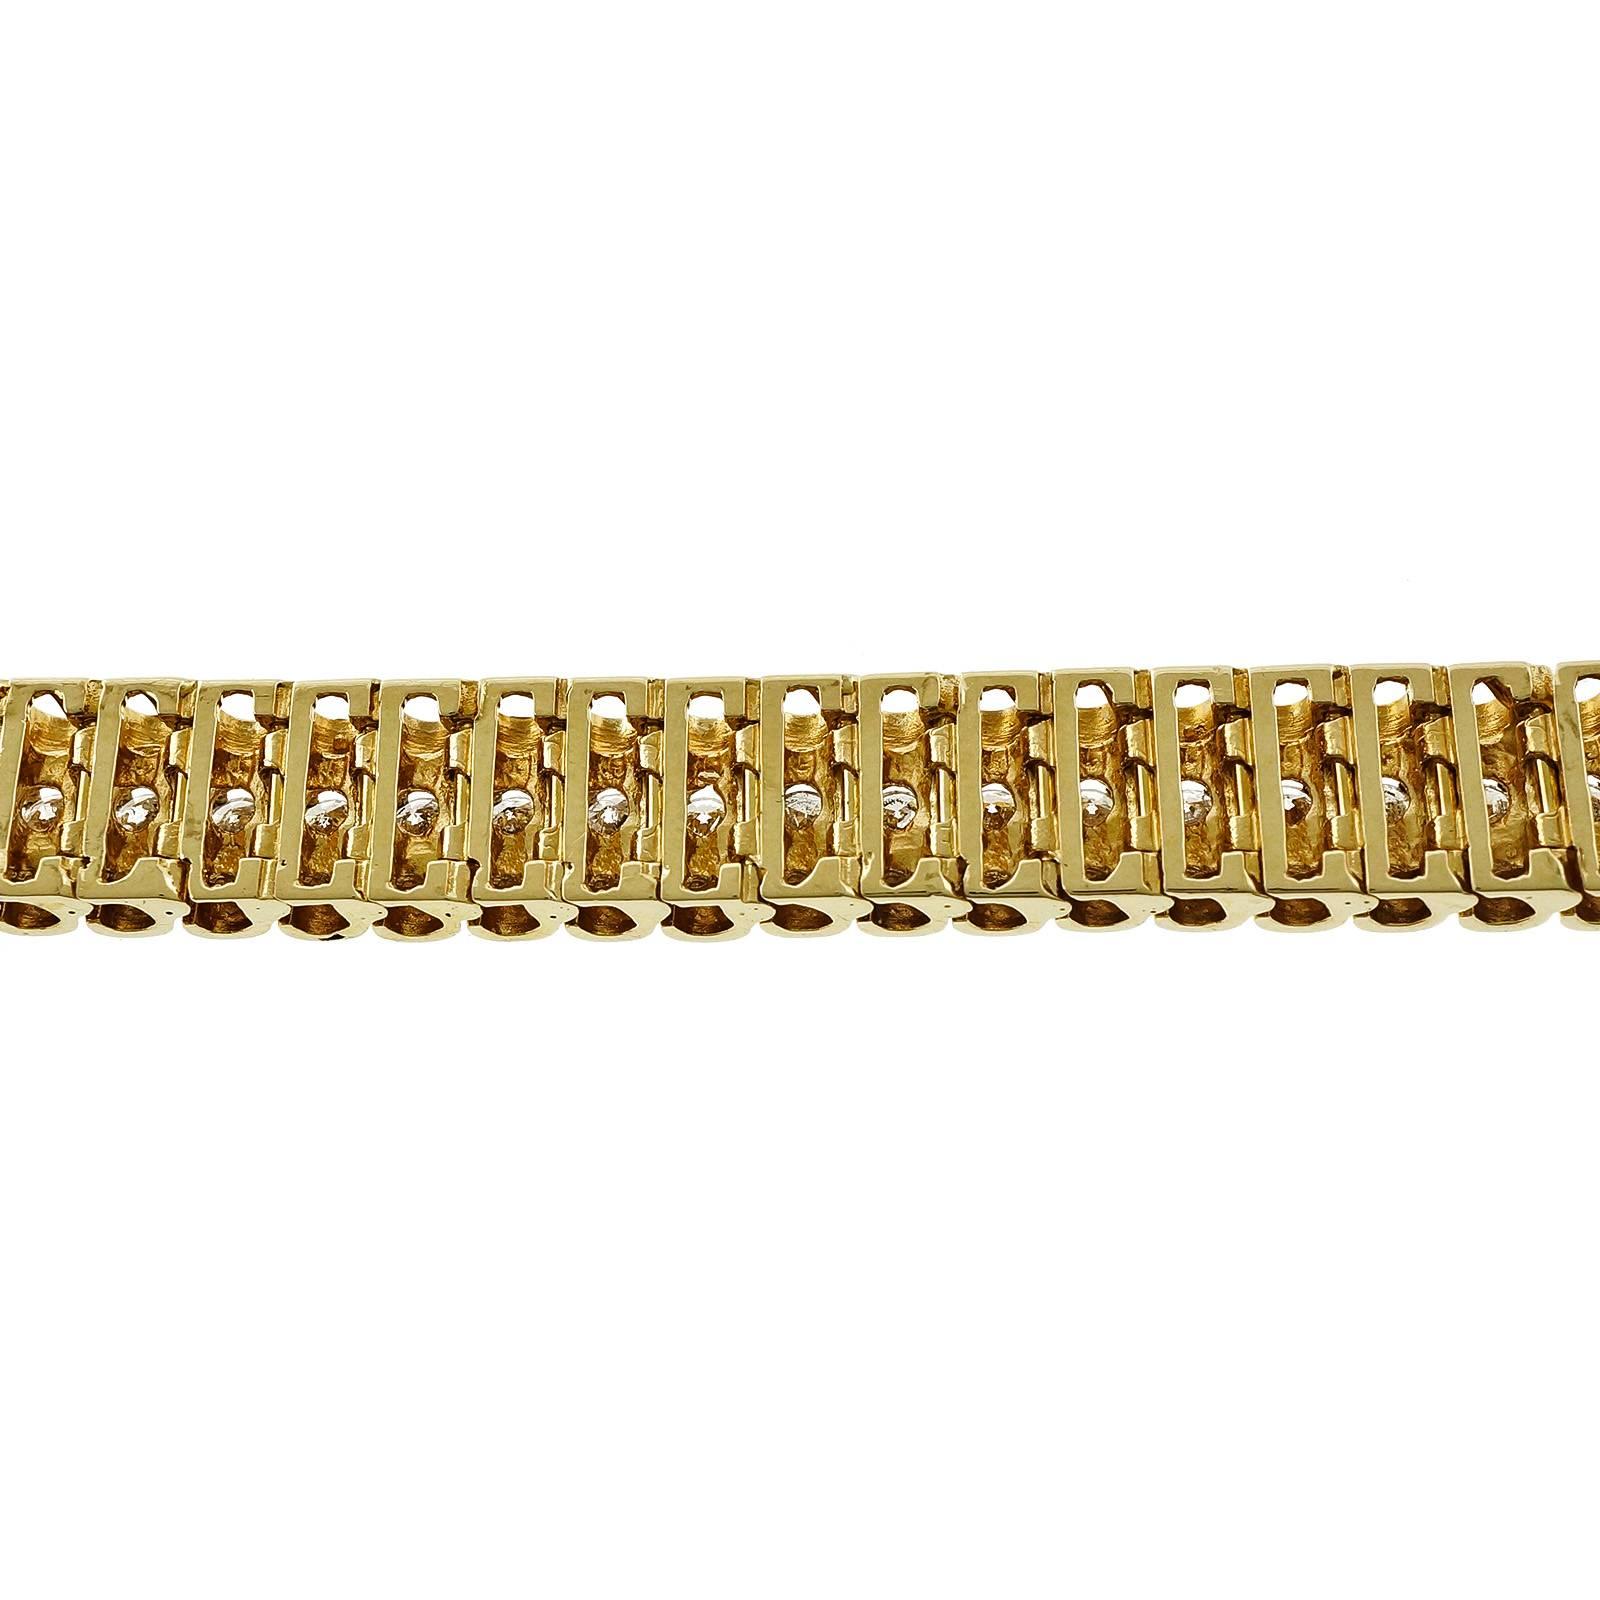 Cylinder link design bracelet in 14k yellow gold with a center strip of bright white diamonds in white gold prongs. Extra secure partially concealed lobster catch. Circa 1970.

52 round diamonds approx. total weight 2.60cts, H, SI1
14k Yellow